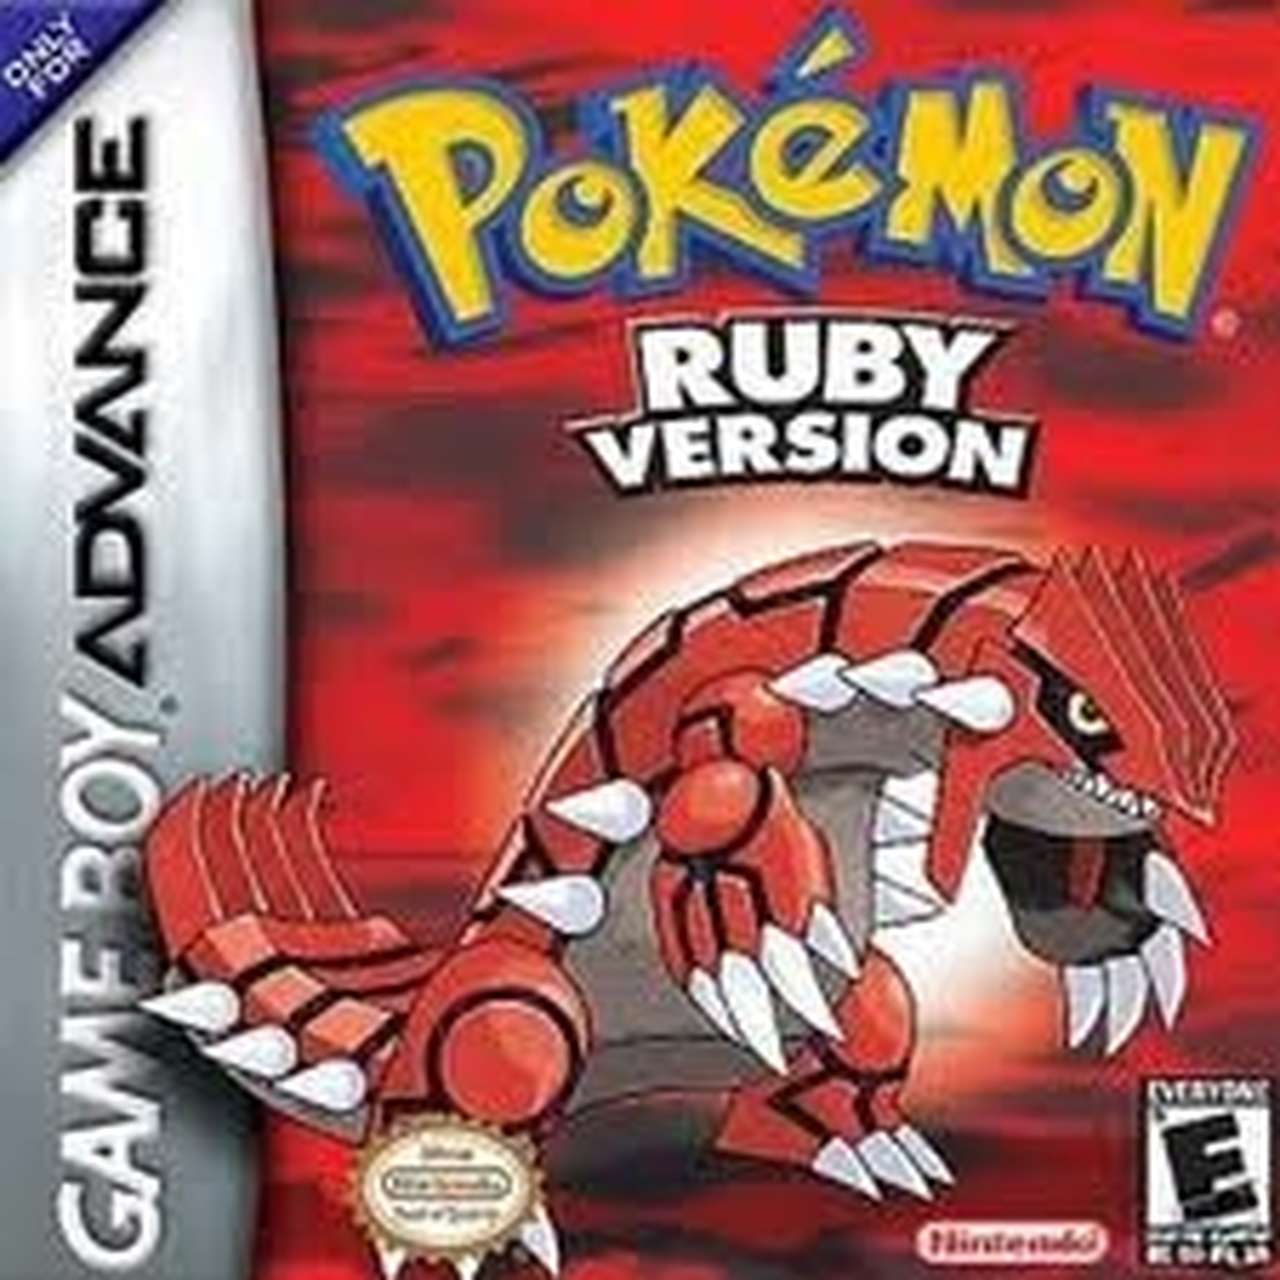 Pokemon Ruby Version GameBoy Advance Game For Sale